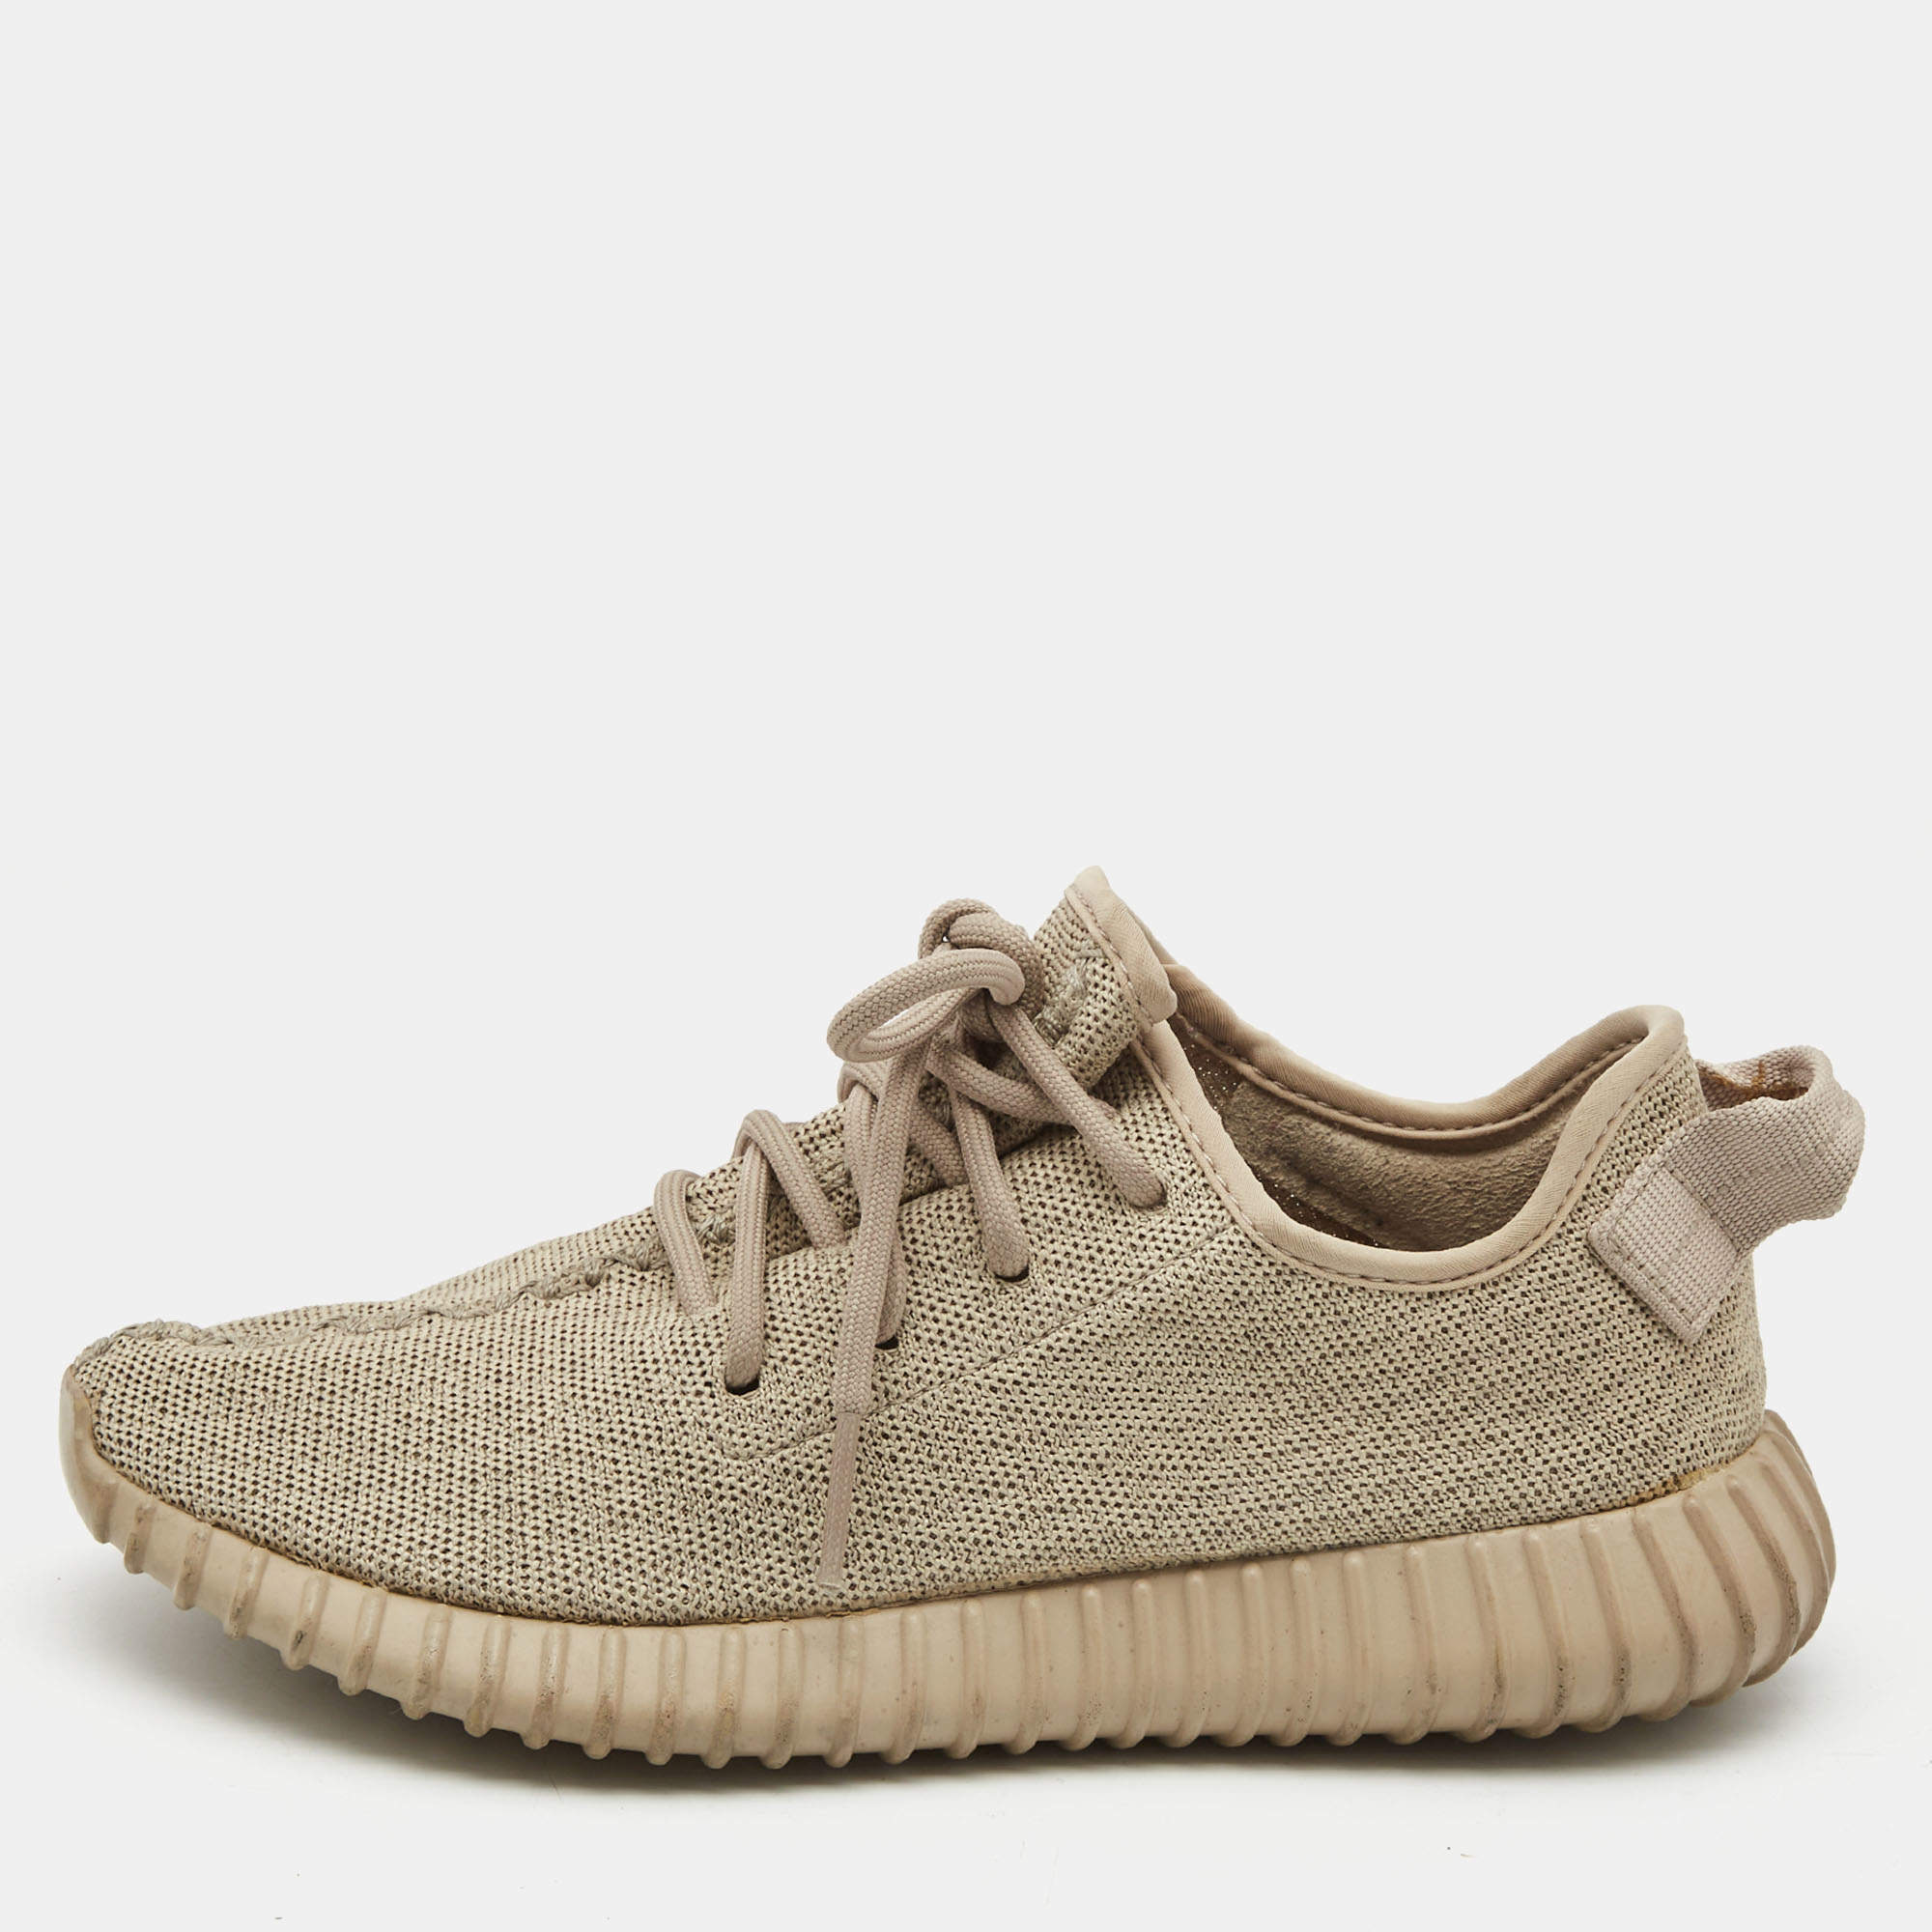 Yeezy Boost 350 V1 Oxford Tan for Sale, Authenticity Guaranteed